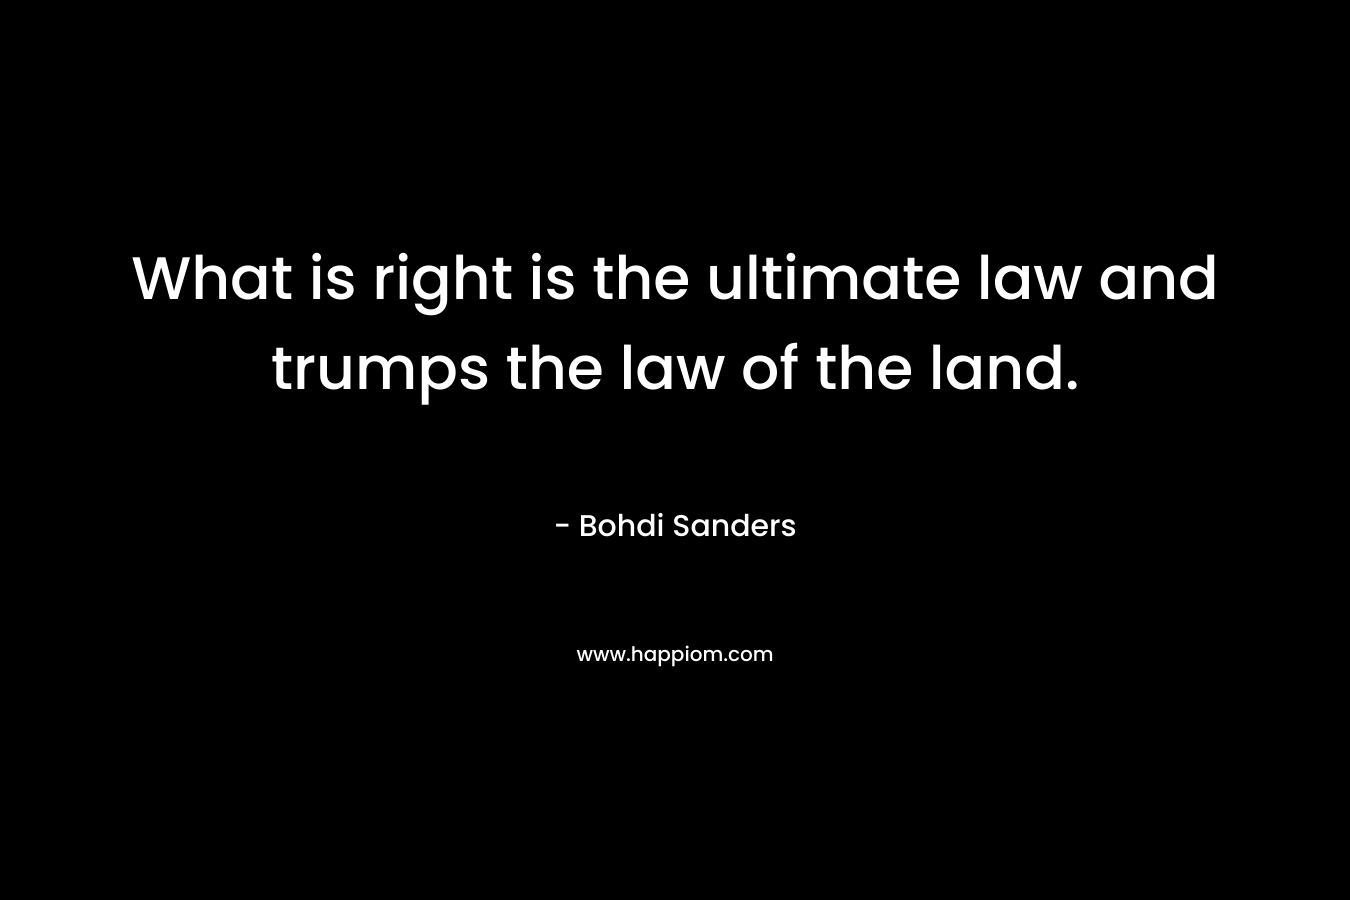 What is right is the ultimate law and trumps the law of the land.